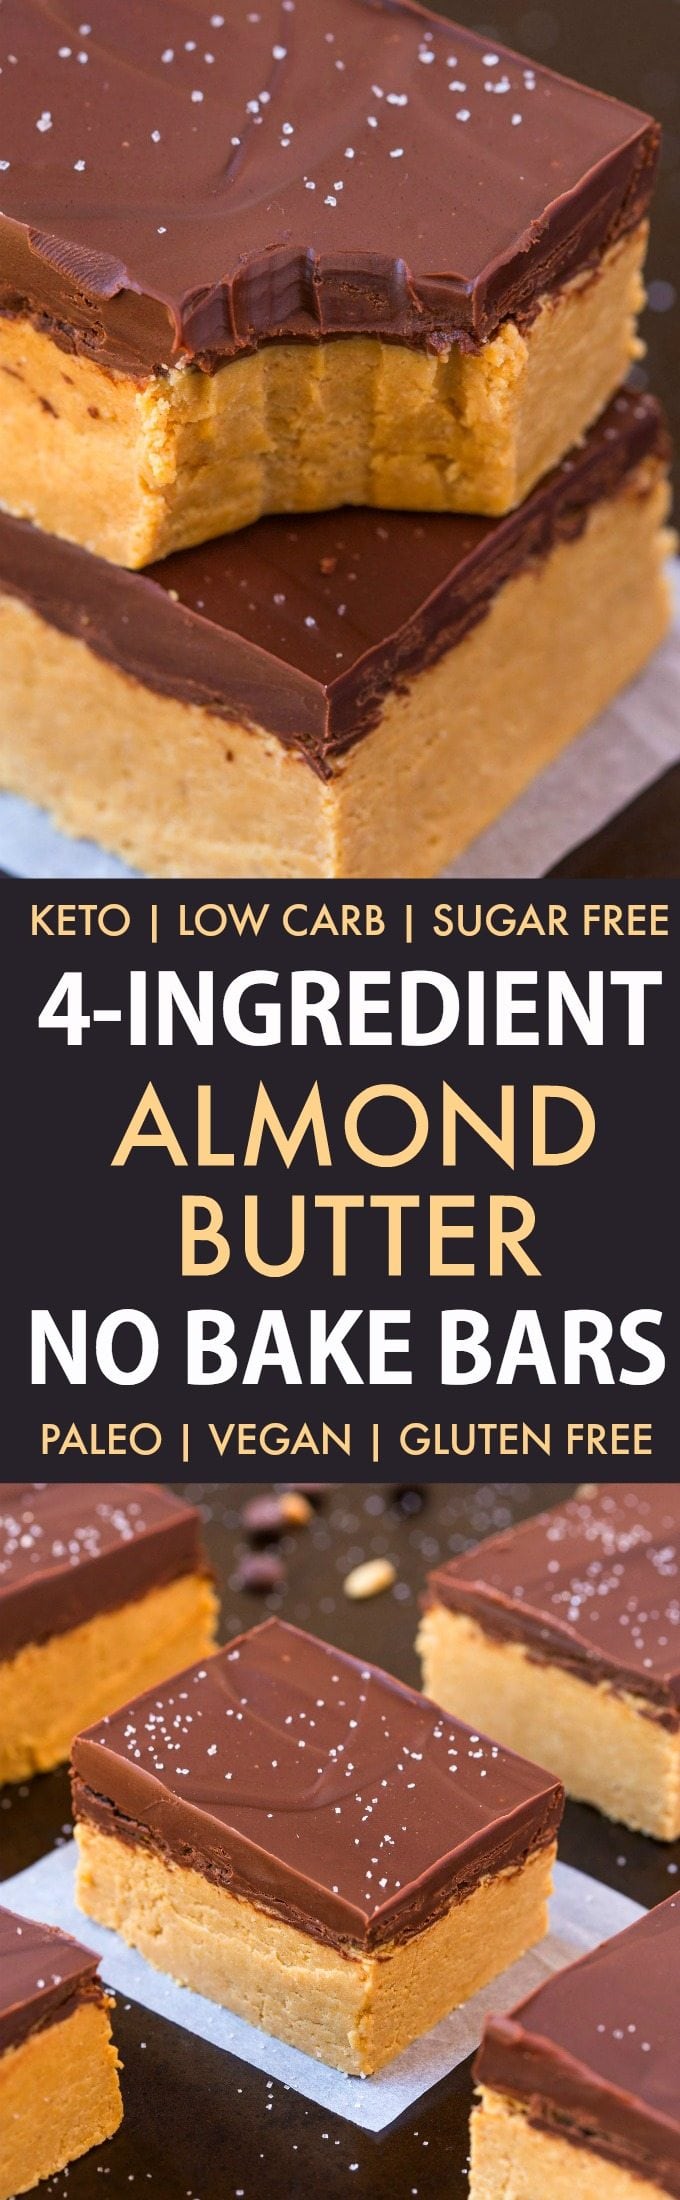 4-Ingredient No Bake Almond Butter Bars (Low Carb, Paleo, Vegan, Keto, Sugar Free, Gluten Free)- Easy, healthy and seriously addictive protein packed almond butter bars using just 4 ingredients and needing 5 minutes. | #keto #ketodessert #almondbutter #dairyfree #healthy #nobake | Recipe on thebigmansworld.com